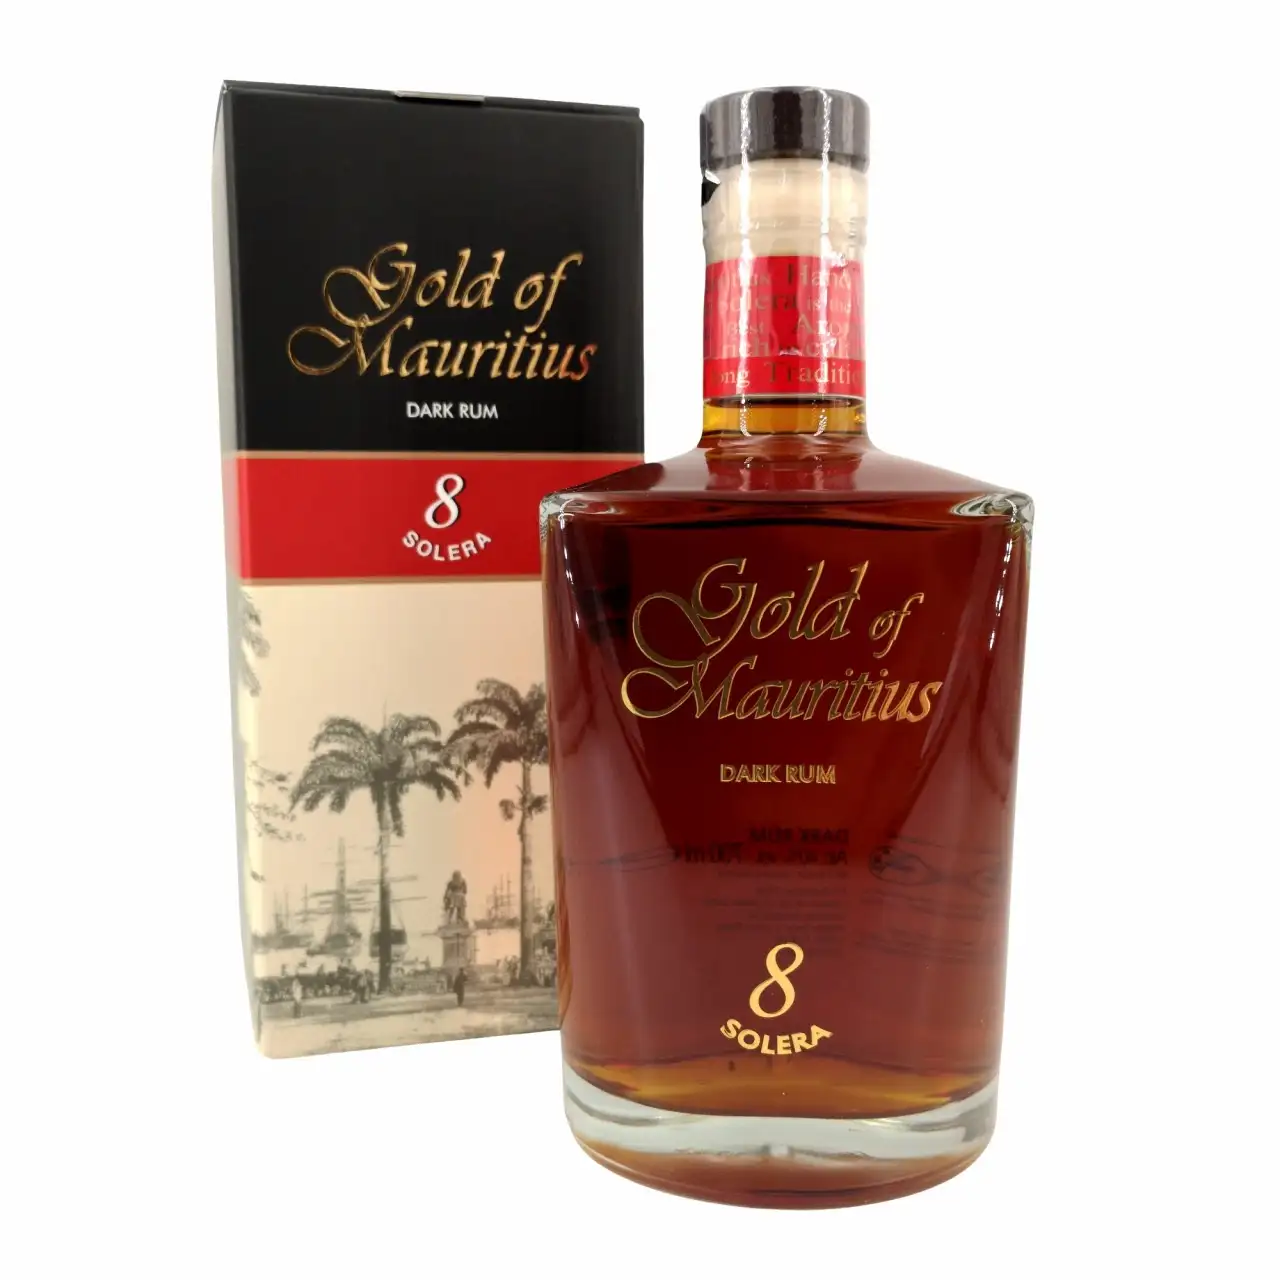 Image of the front of the bottle of the rum Gold of Mauritius Dark Rum 8 Solera